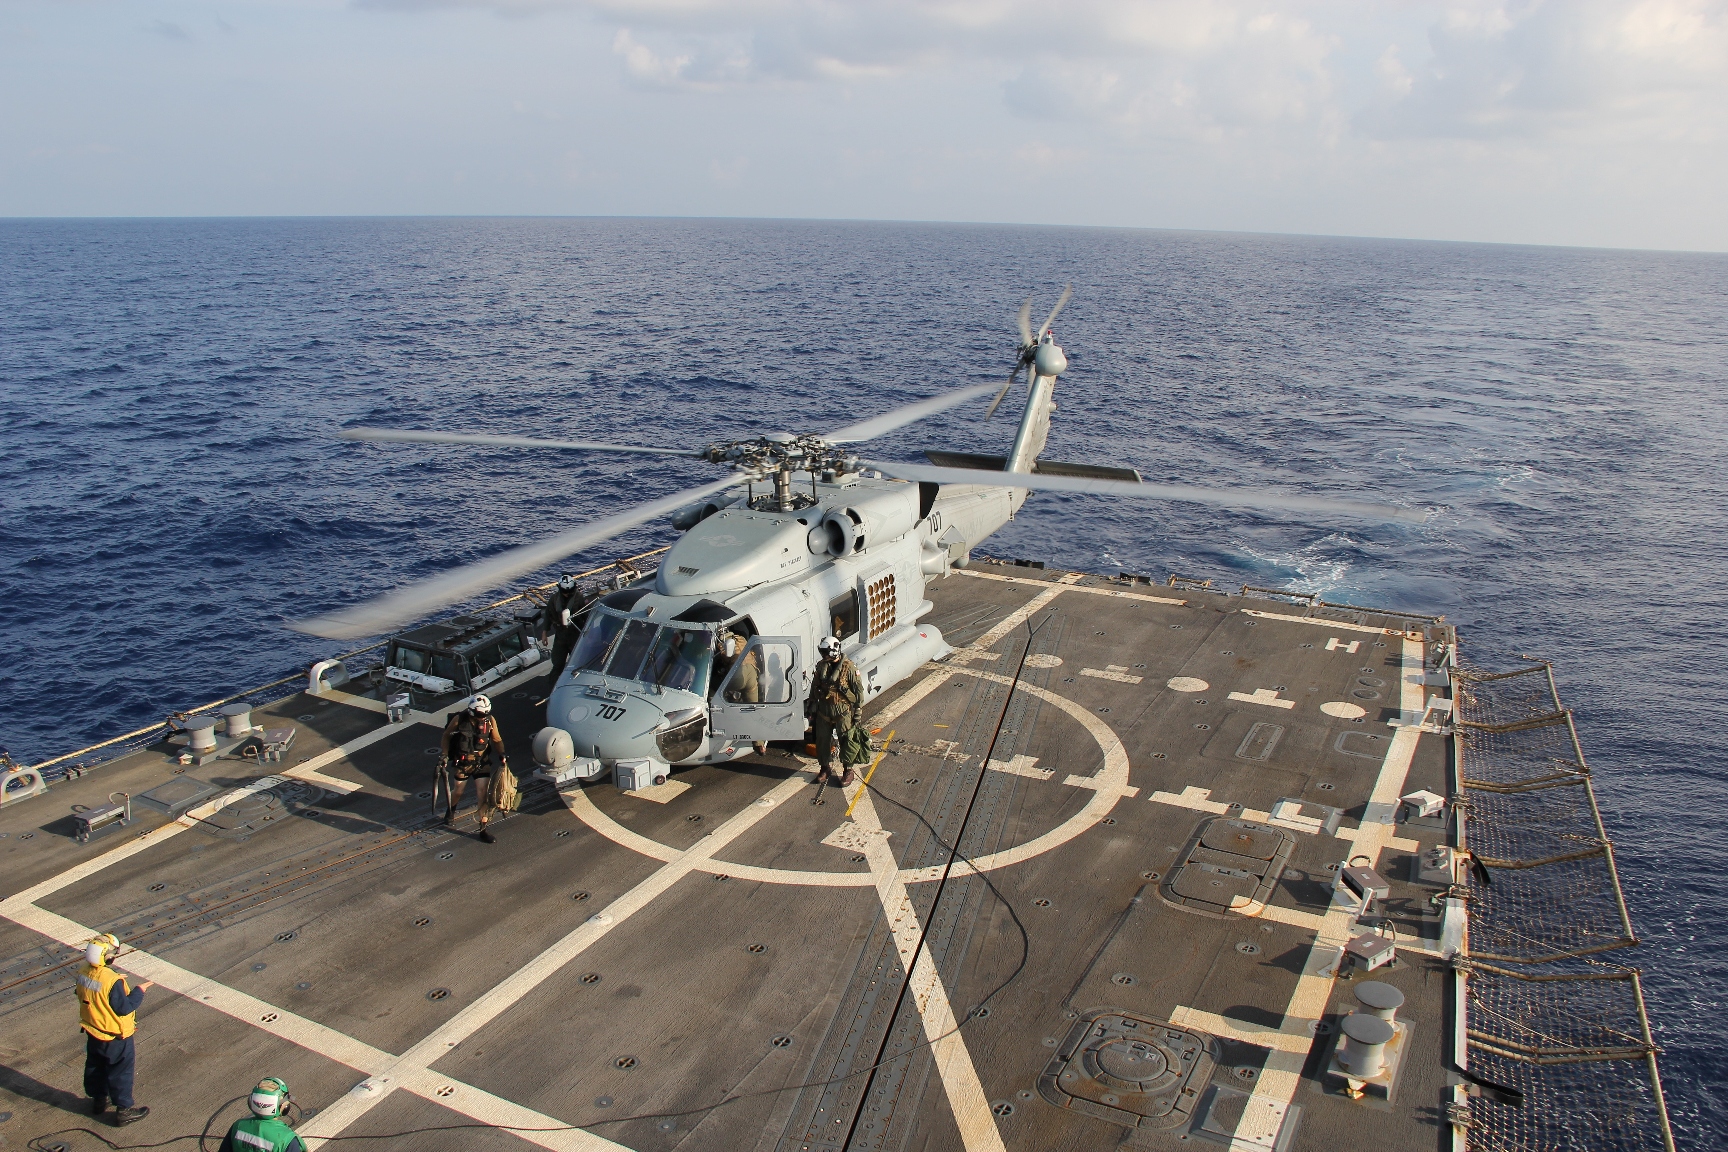 A U.S. Navy MH-60R Sea Hawk helicopter preparing to return to the search and rescue for the missing Malaysian airlines flight MH370 on March 9, 2014 at sea in the Gulf of Thailand. (U.S. Navy &mdash; Getty Images)